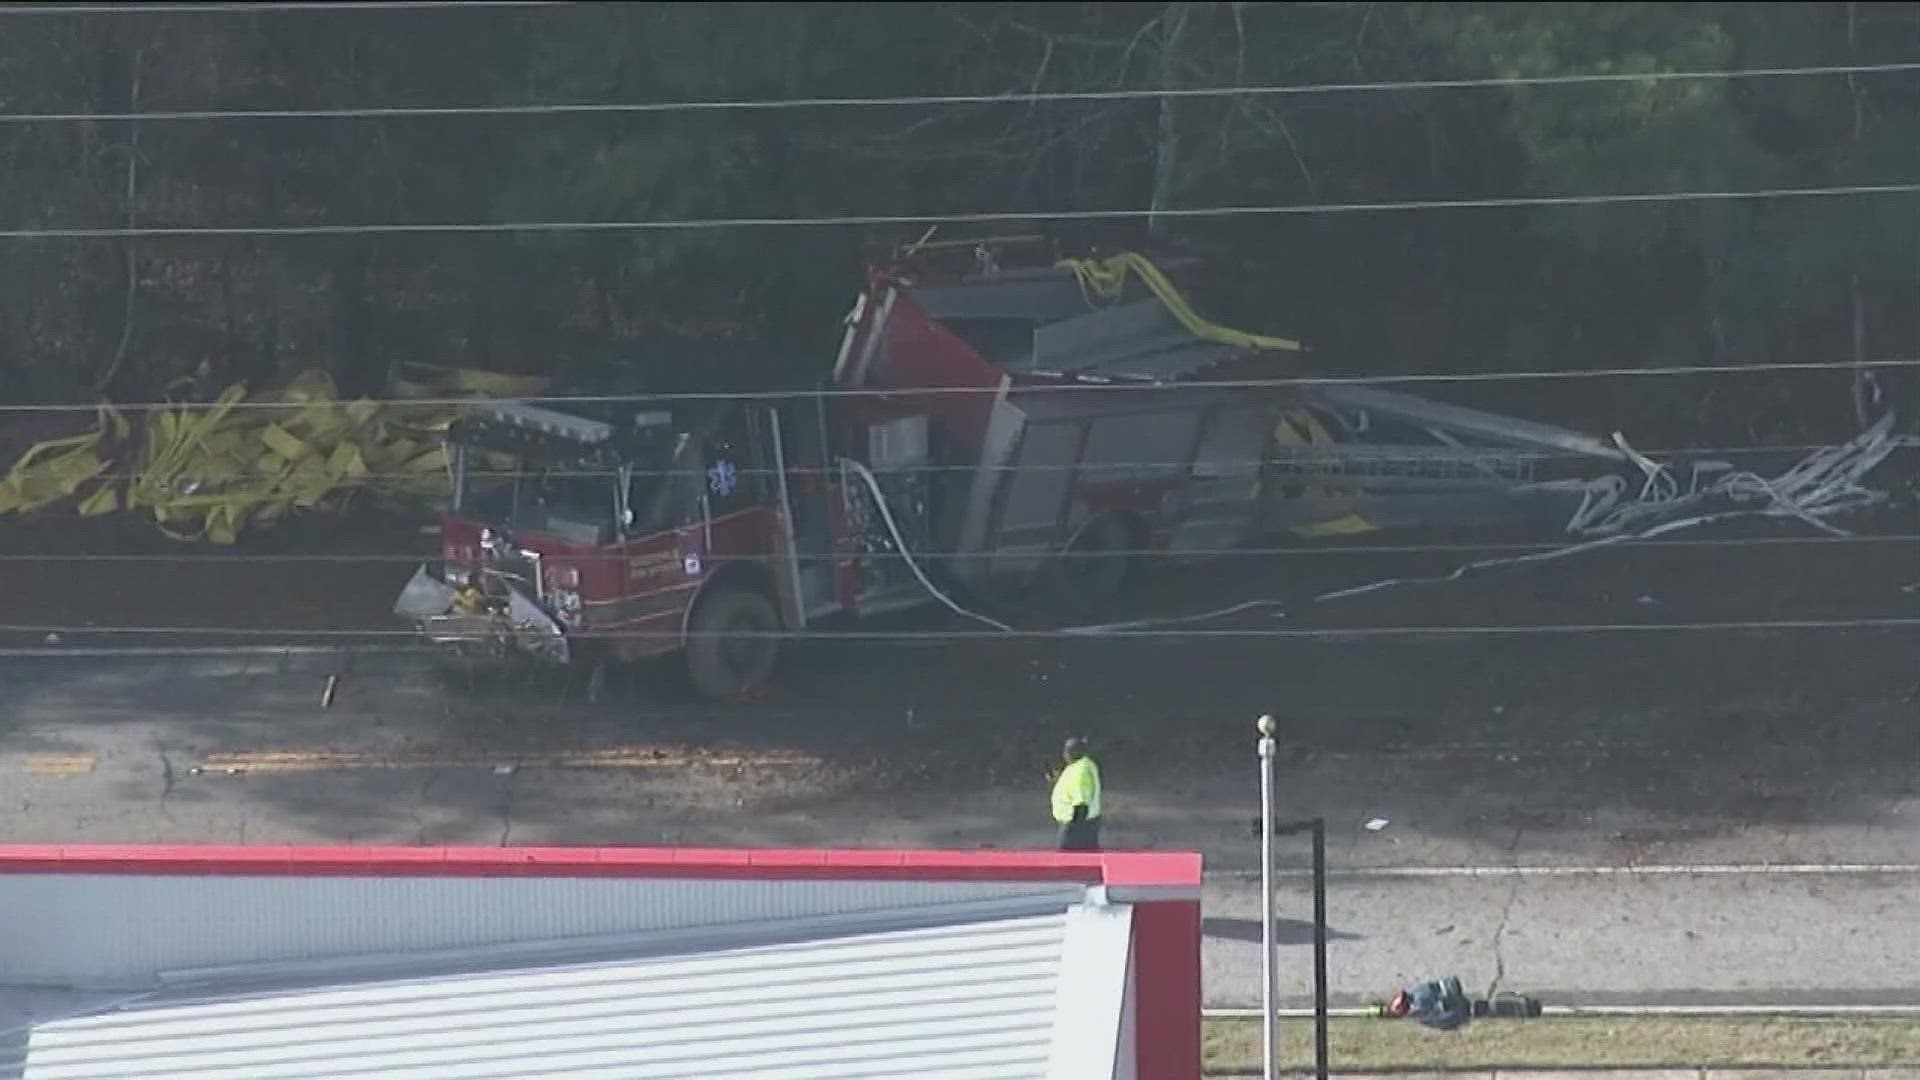 Officials have not said what caused the crash.